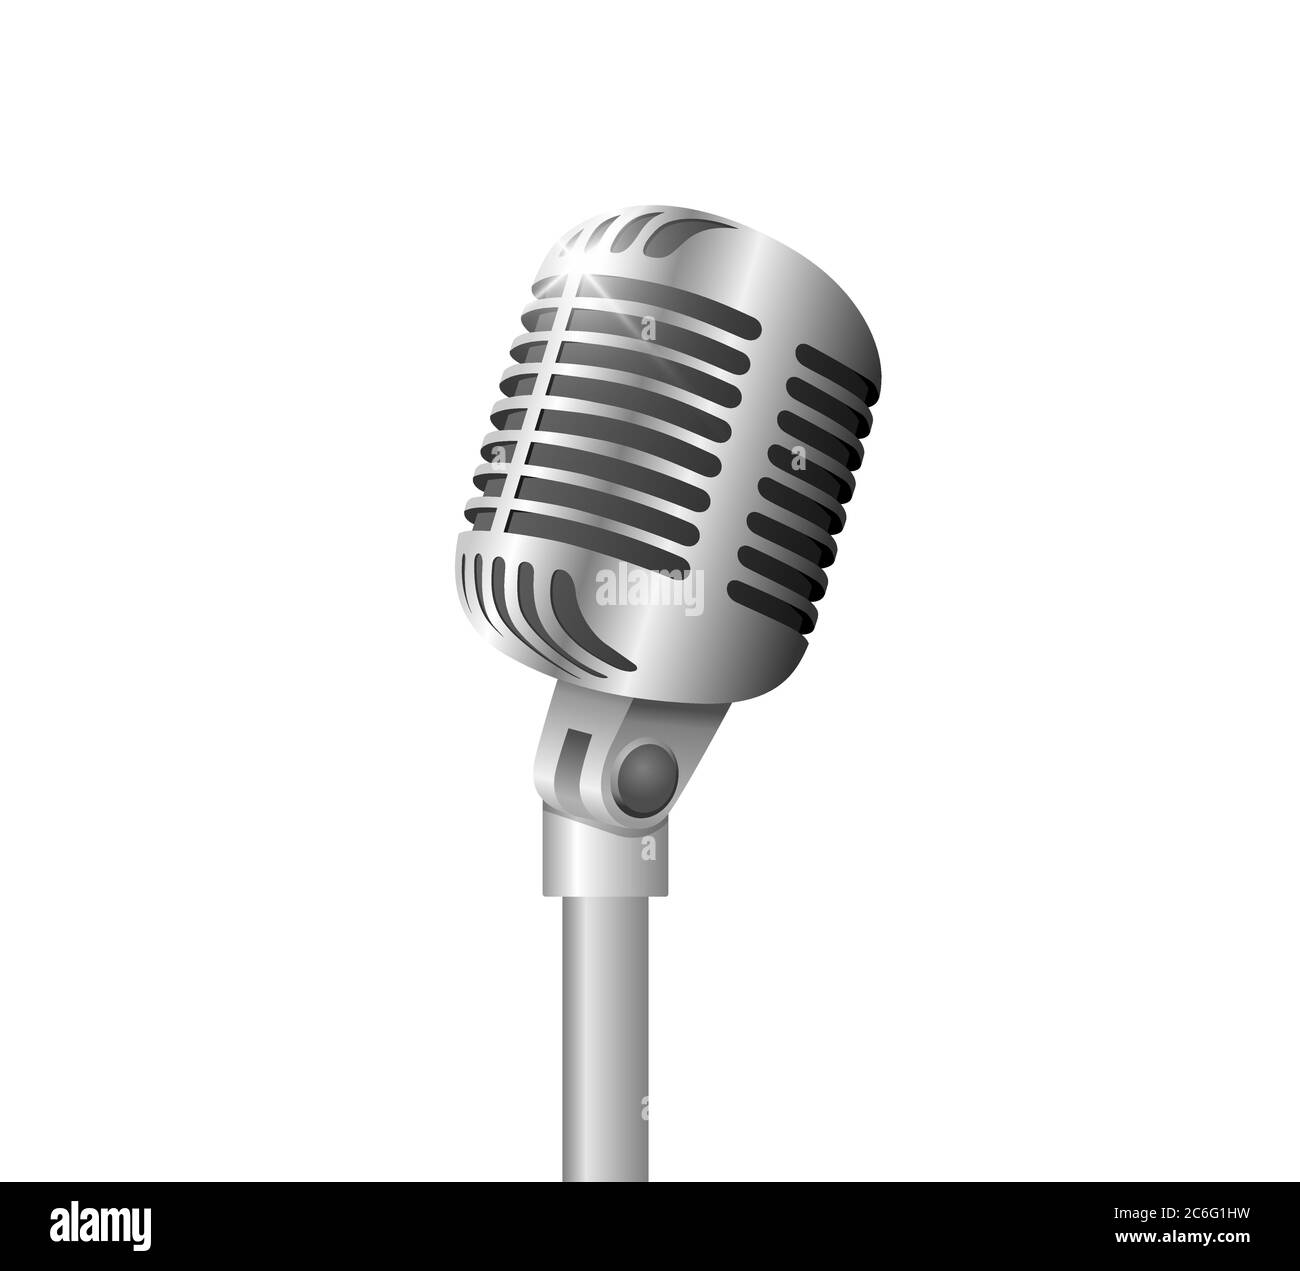 Retro vintage metal microphone on stand on white background. Mic with flare. Music, voice, record icon. Recording studio symbol. Realistic silver style vector eps illustration Stock Vector